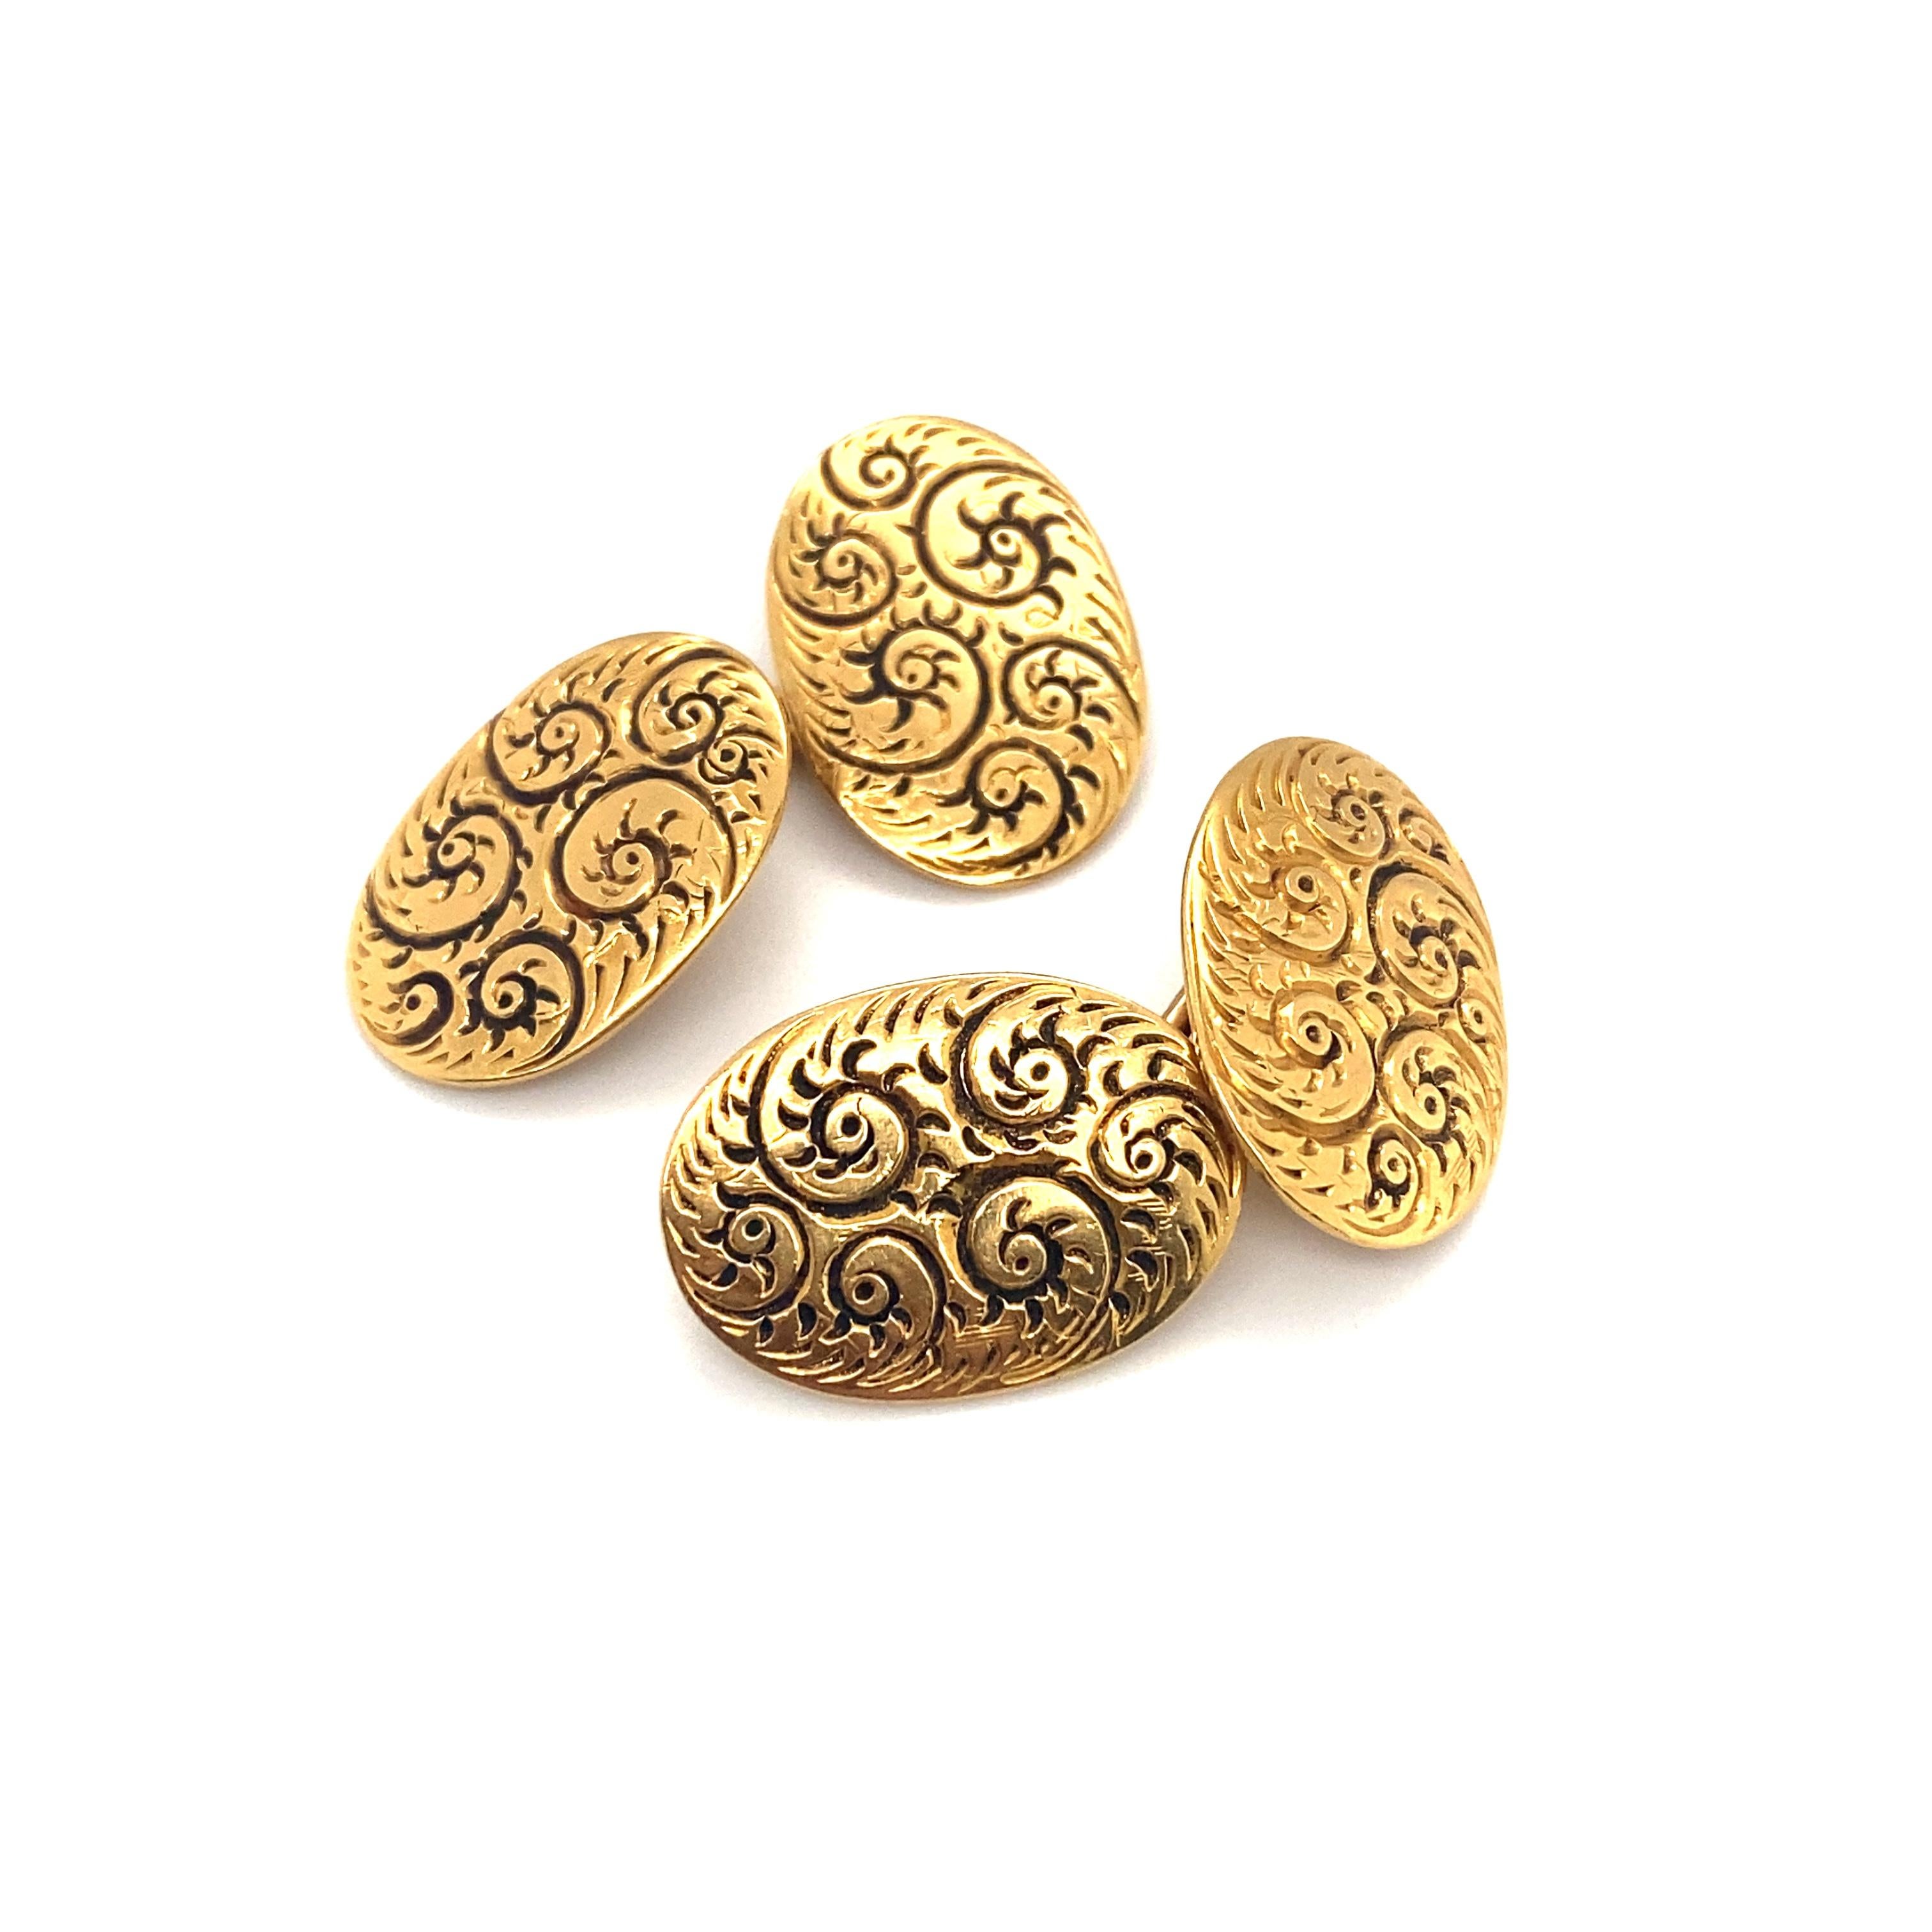 Item Details: This pair of cufflinks from Tiffany & Co. has an etched design and is a perfect Victorian piece to wear with a formal ensemble.

Circa: 1890s
Metal Type: 18k gold
Weight: 11.9g
